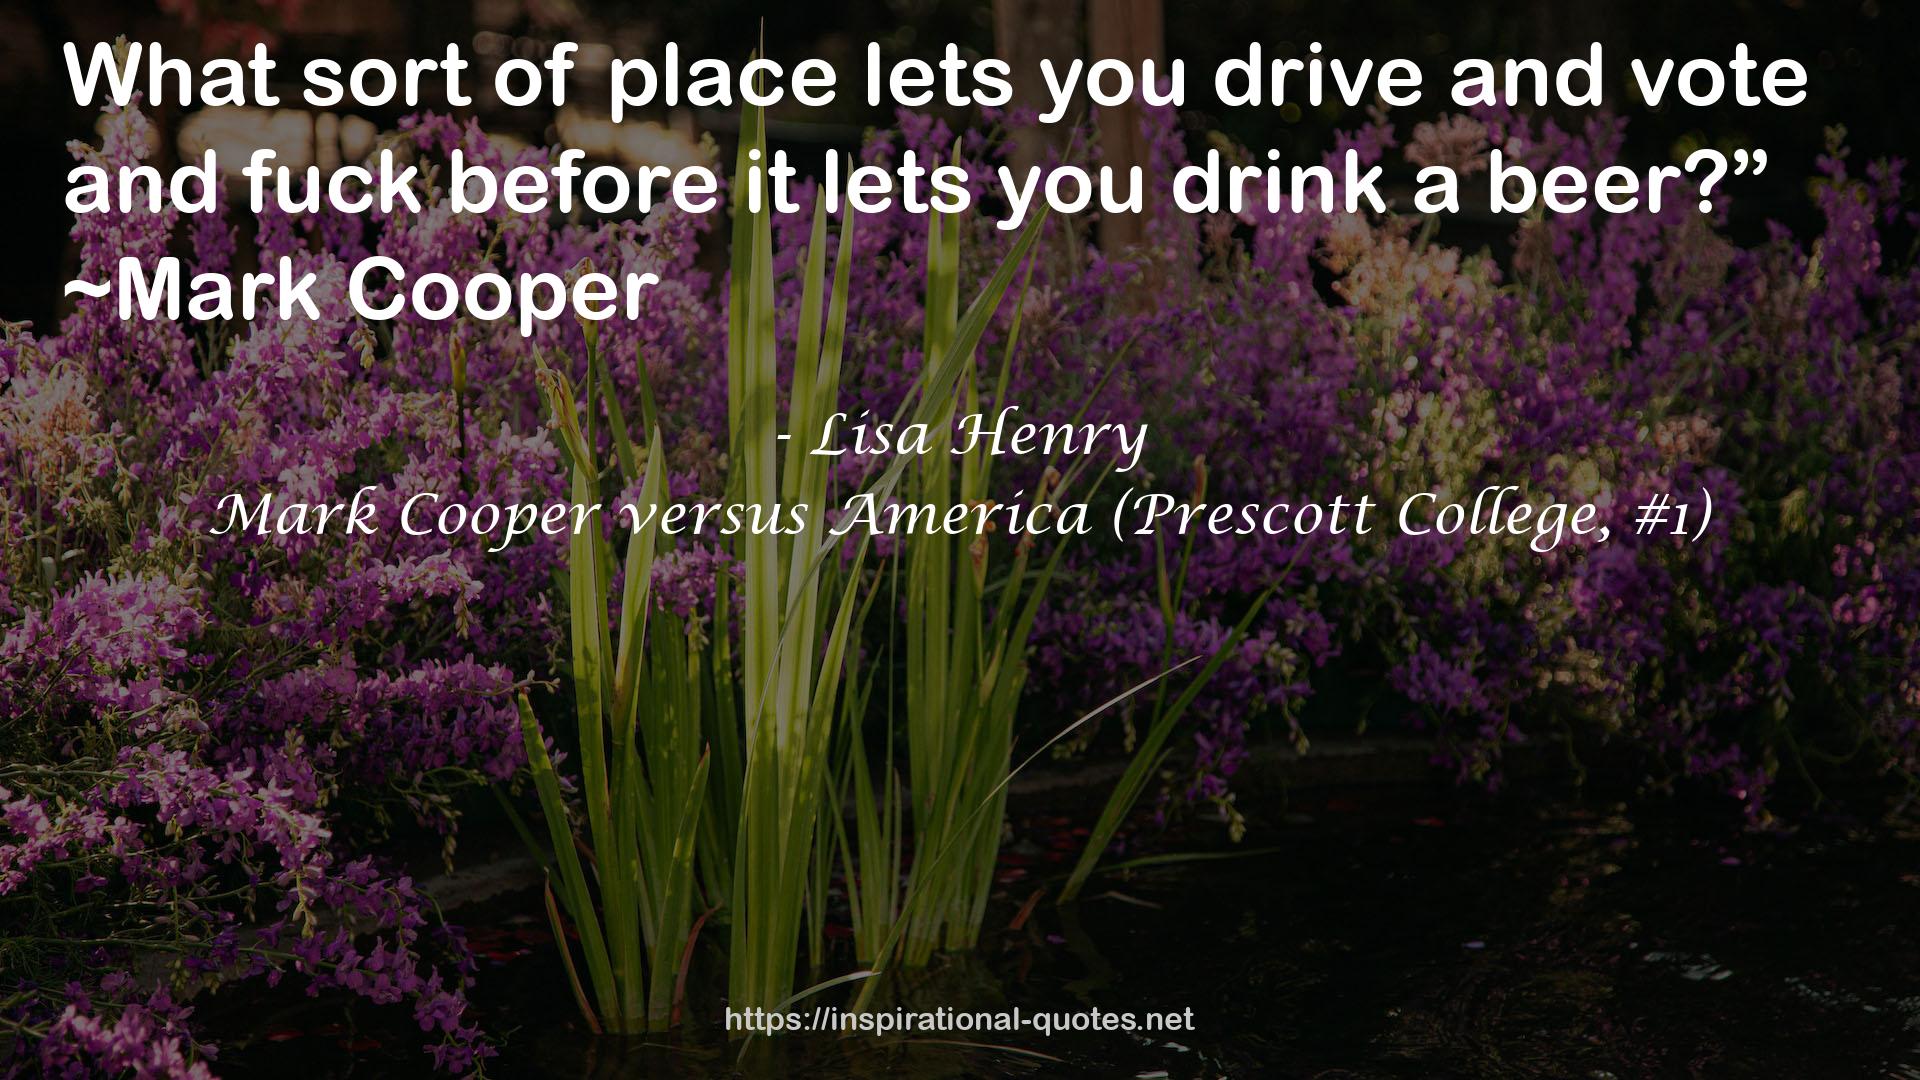 Lisa Henry QUOTES